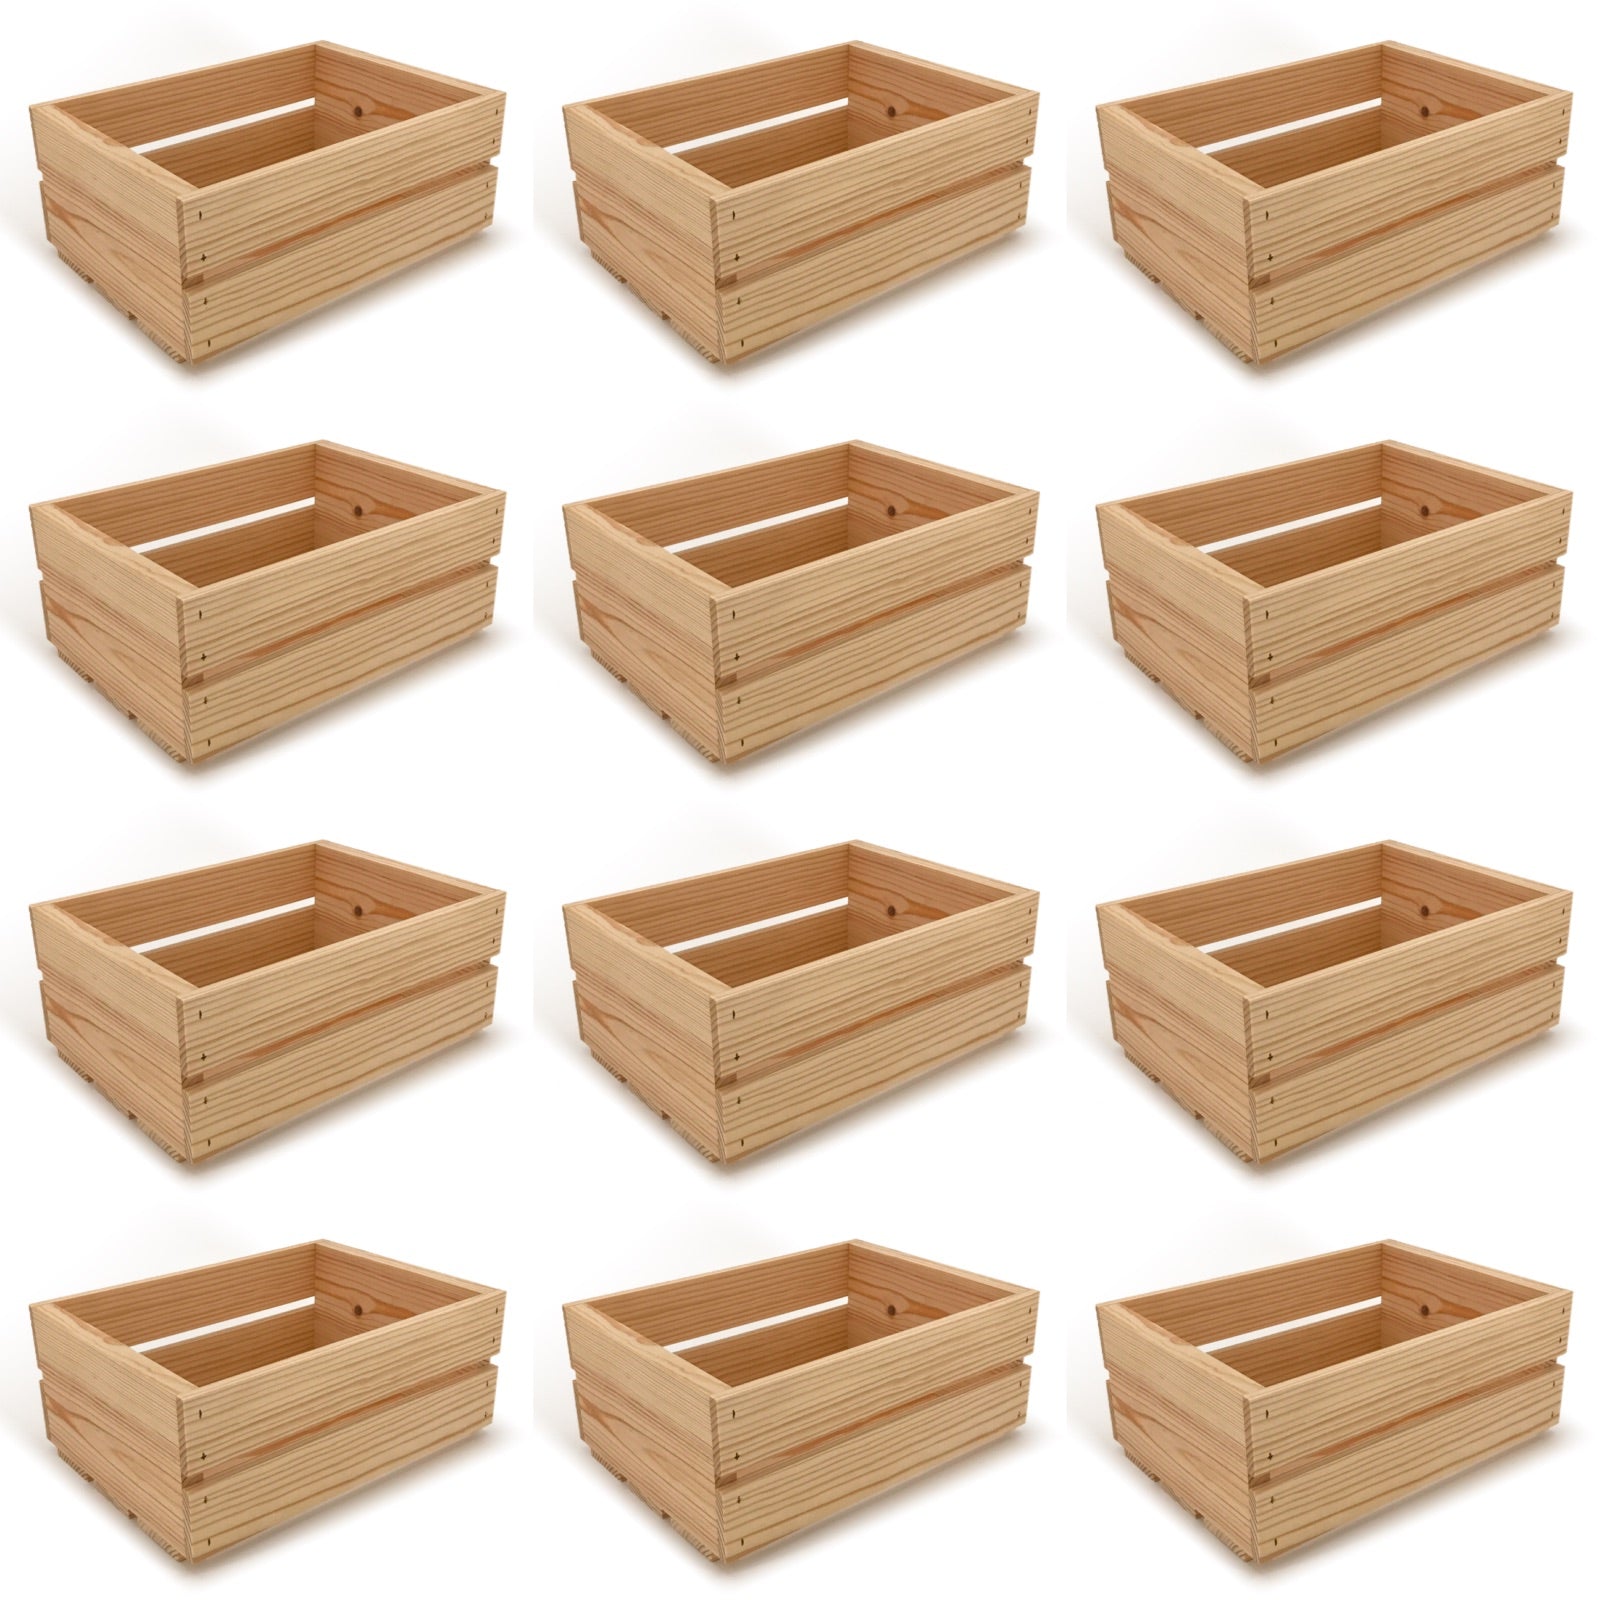 12 Small wooden crates 12x9x5.25